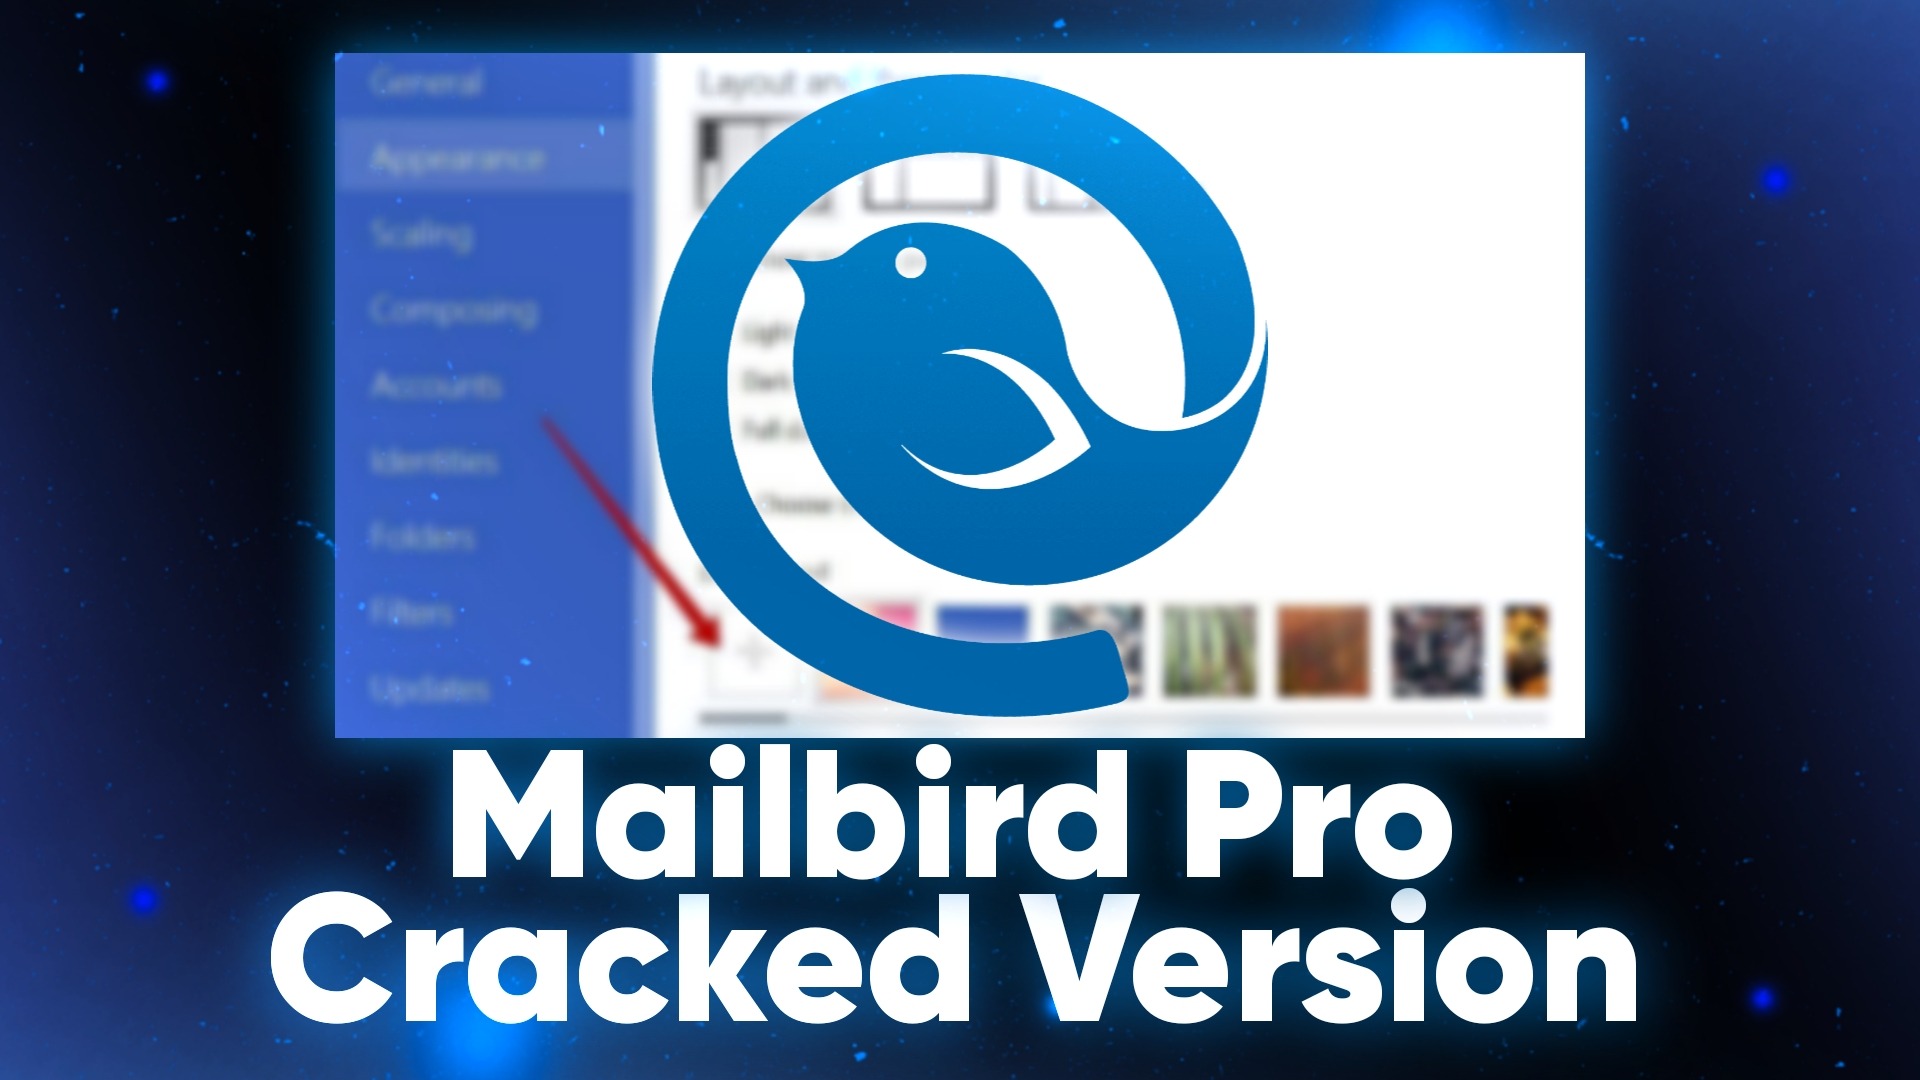 download the last version for ipod Mailbird Pro 3.0.0